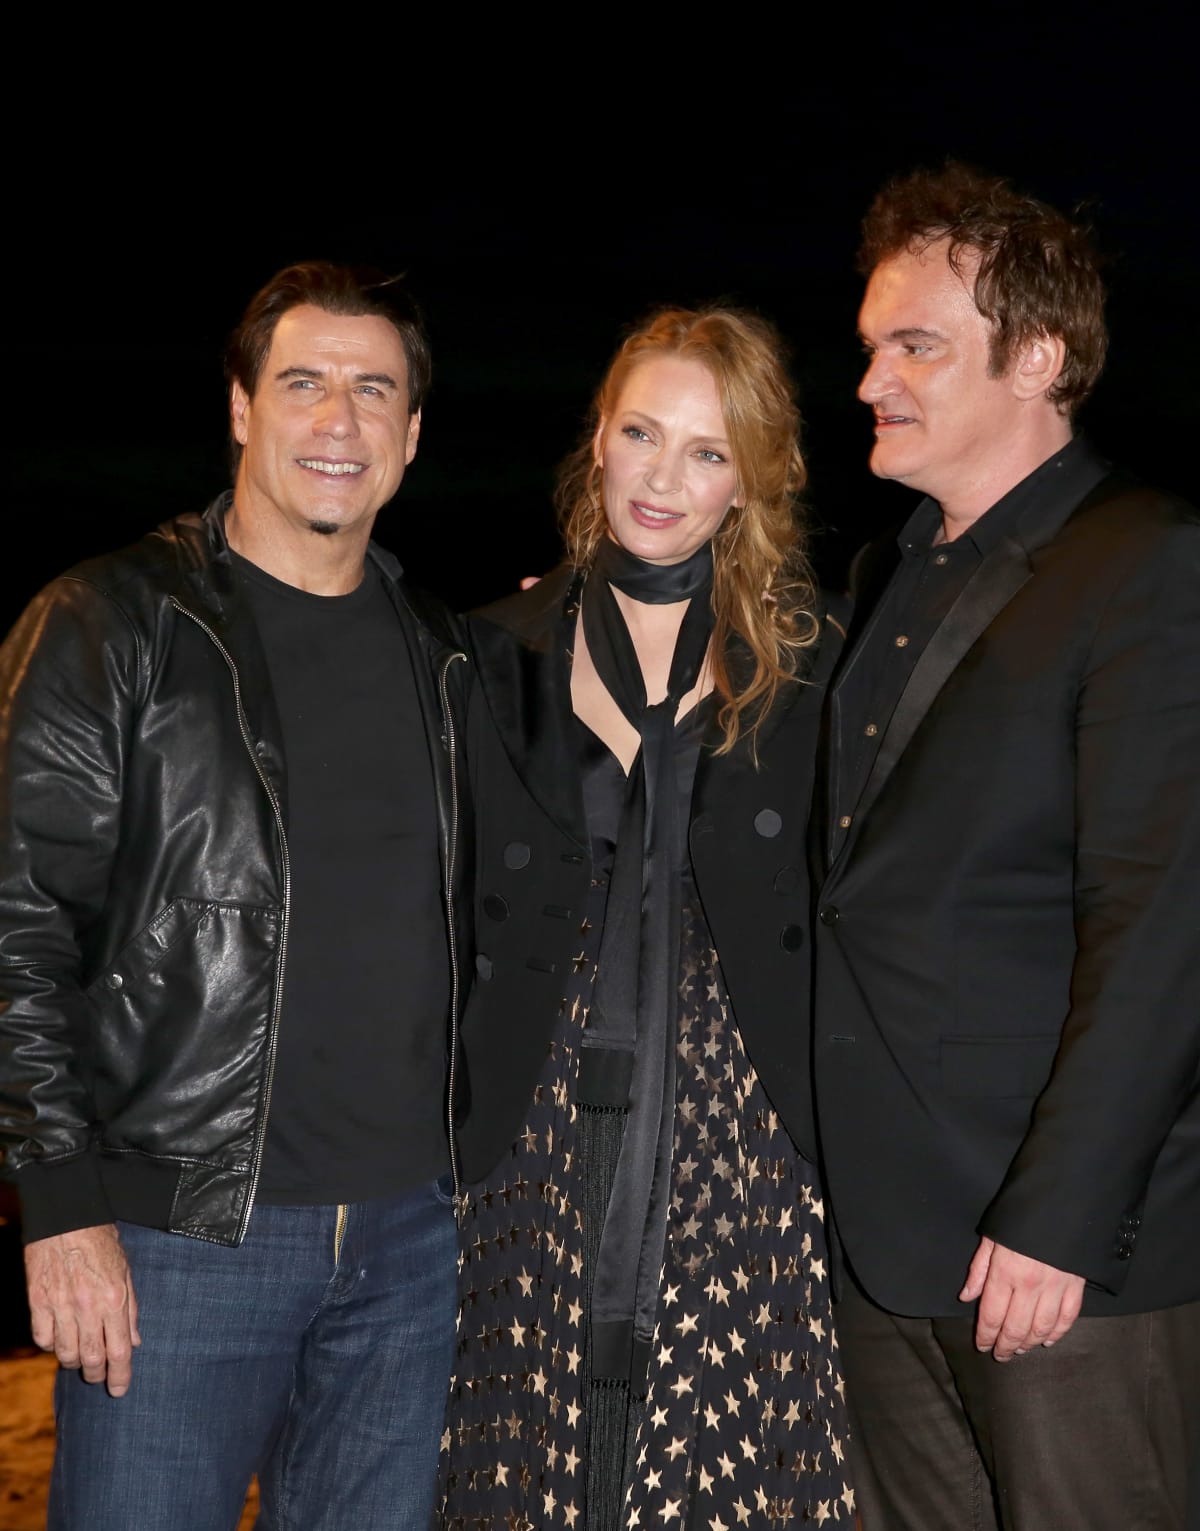 CANNES, FRANCE - MAY 23:  (L-R) John Travolta, Uma Thurman and Quentin Tarantino attend a screening of Pulp Fiction at the 67th Annual Cannes Film Festival on May 23, 2014 in Cannes, France.  (Photo by Tim P. Whitby/Getty Images)